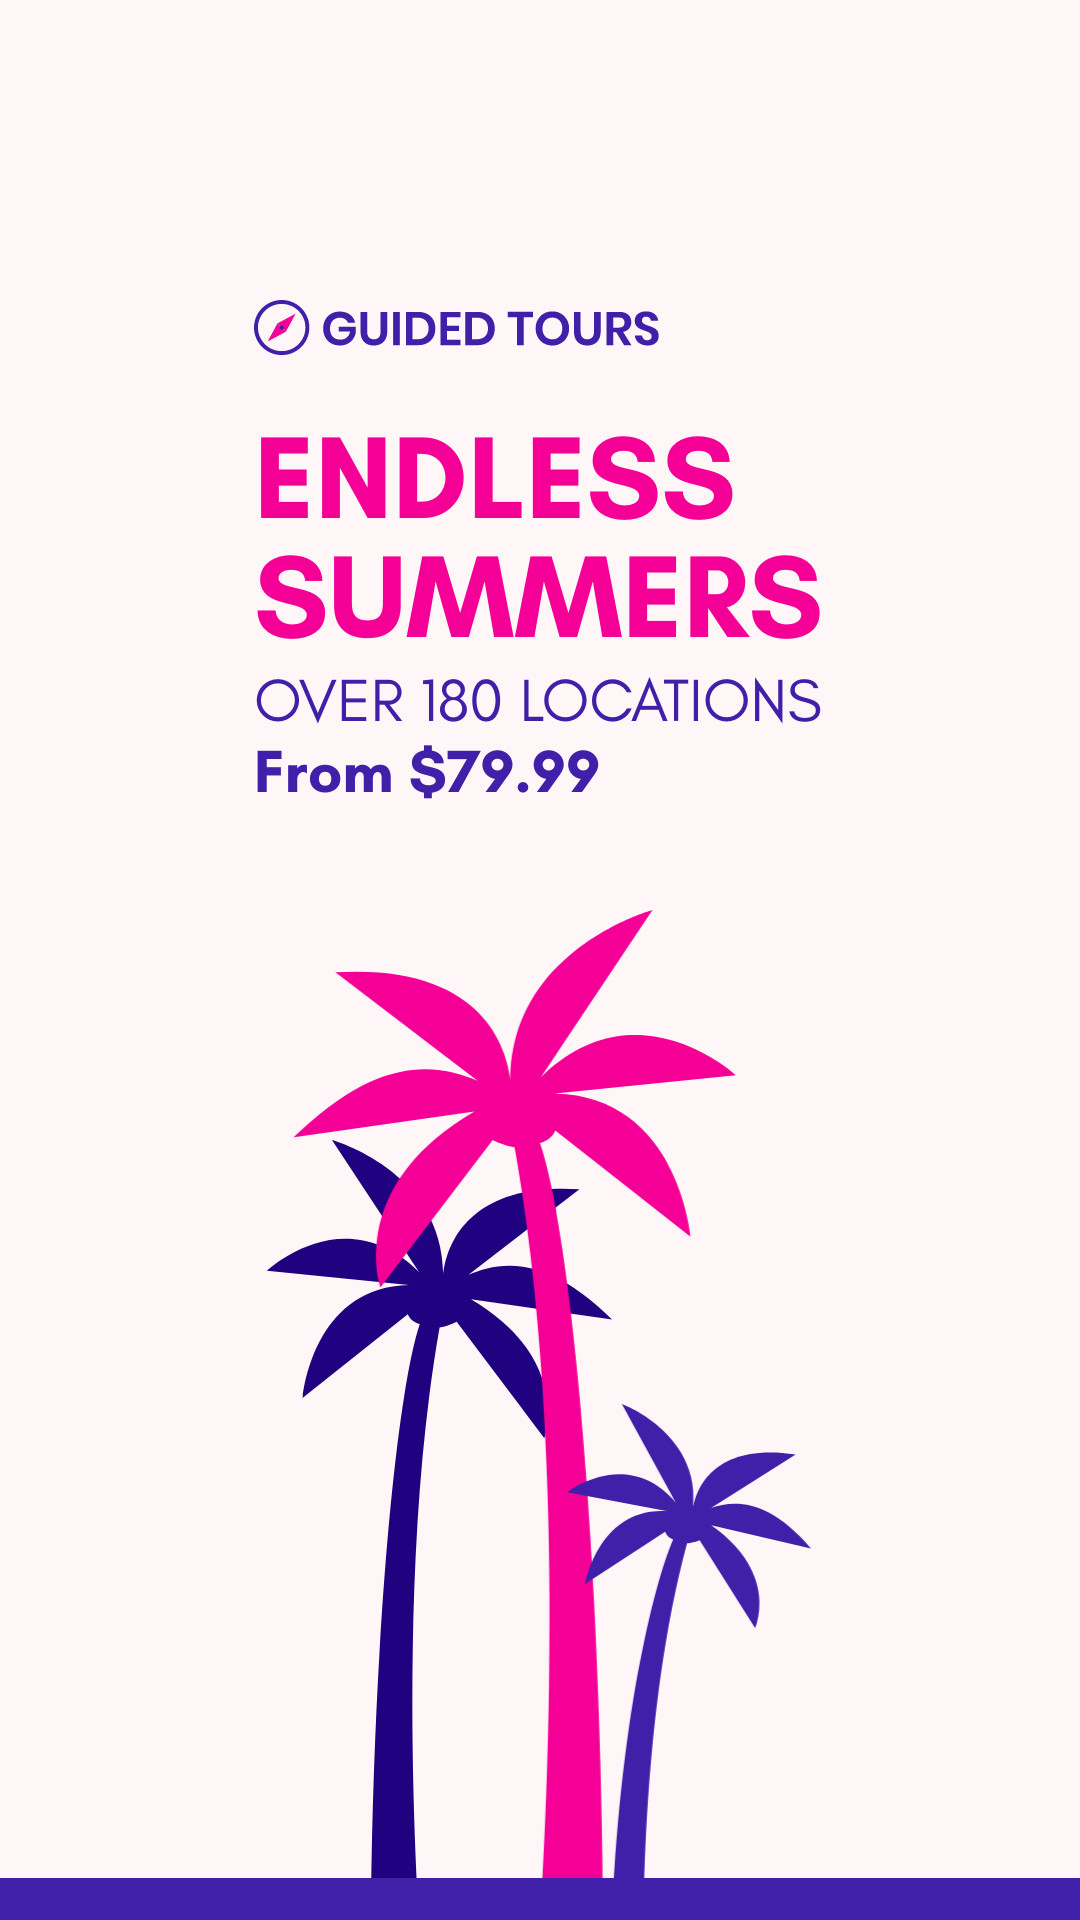 Guided Tours for Endless Summers  Inline Rectangle 300x250